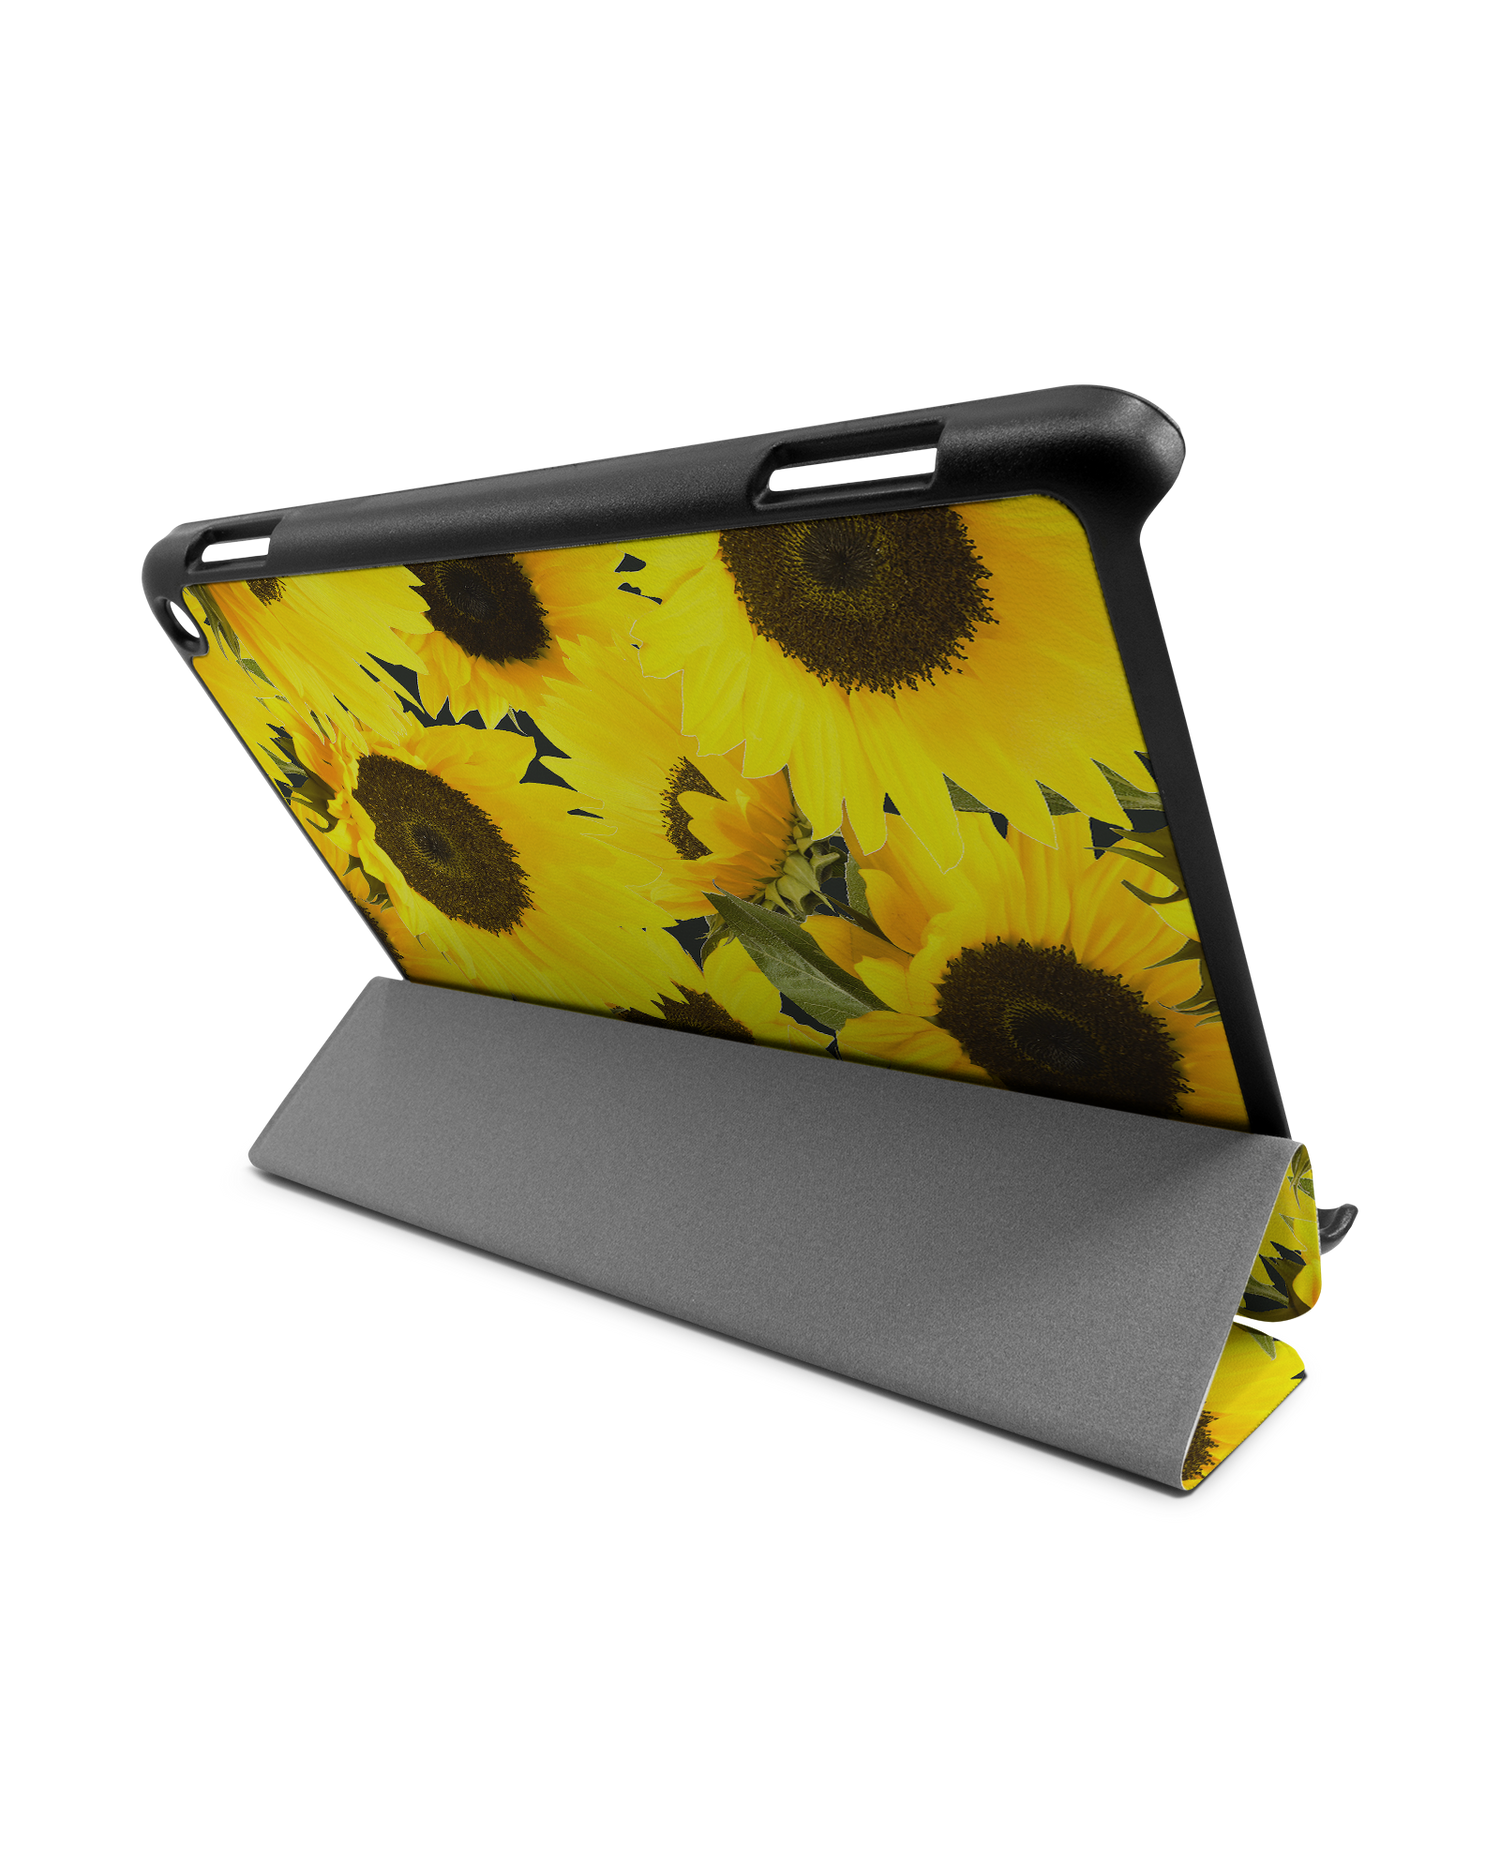 Sunflowers Tablet Smart Case for Amazon Fire HD 8 (2022), Amazon Fire HD 8 Plus (2022), Amazon Fire HD 8 (2020), Amazon Fire HD 8 Plus (2020): Used as Stand